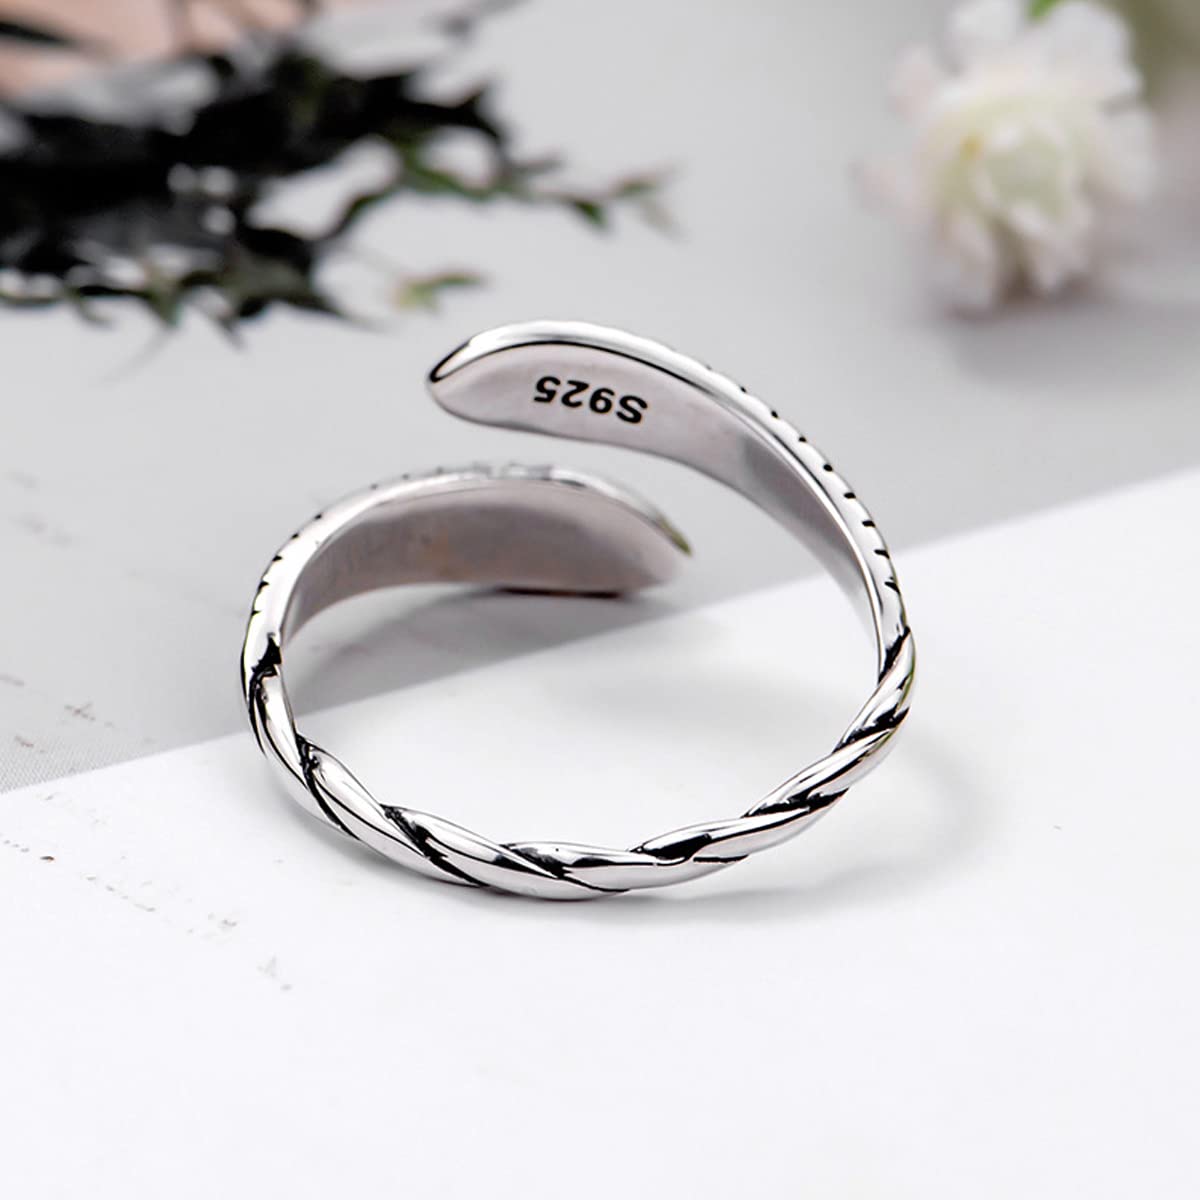 Heart design 925 solid sterling silver rings jewelry for girls, women in  Bangalore at best price by SILVER SHOPE JEWELLERS - Justdial